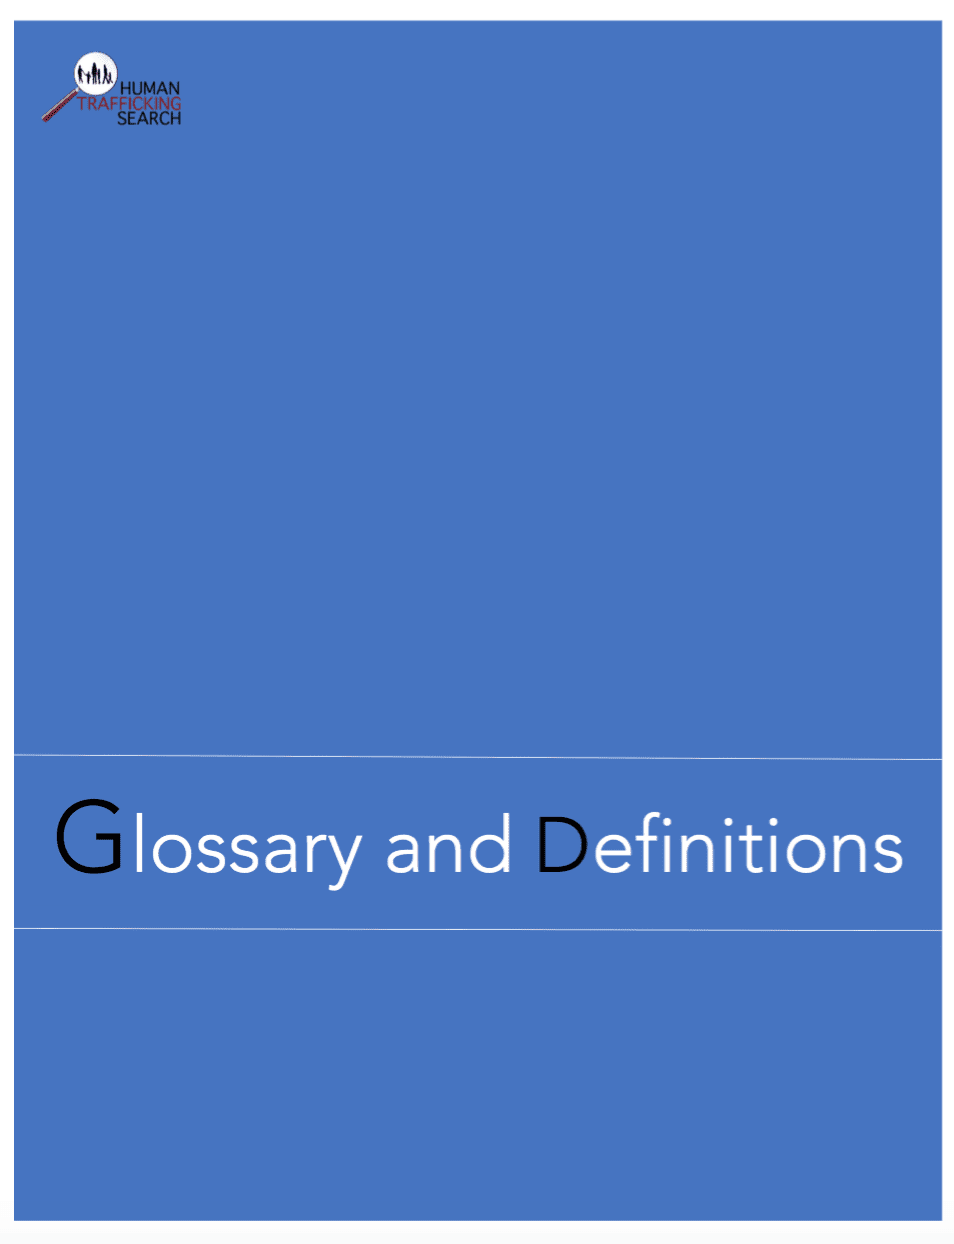 Glossary and Definitions